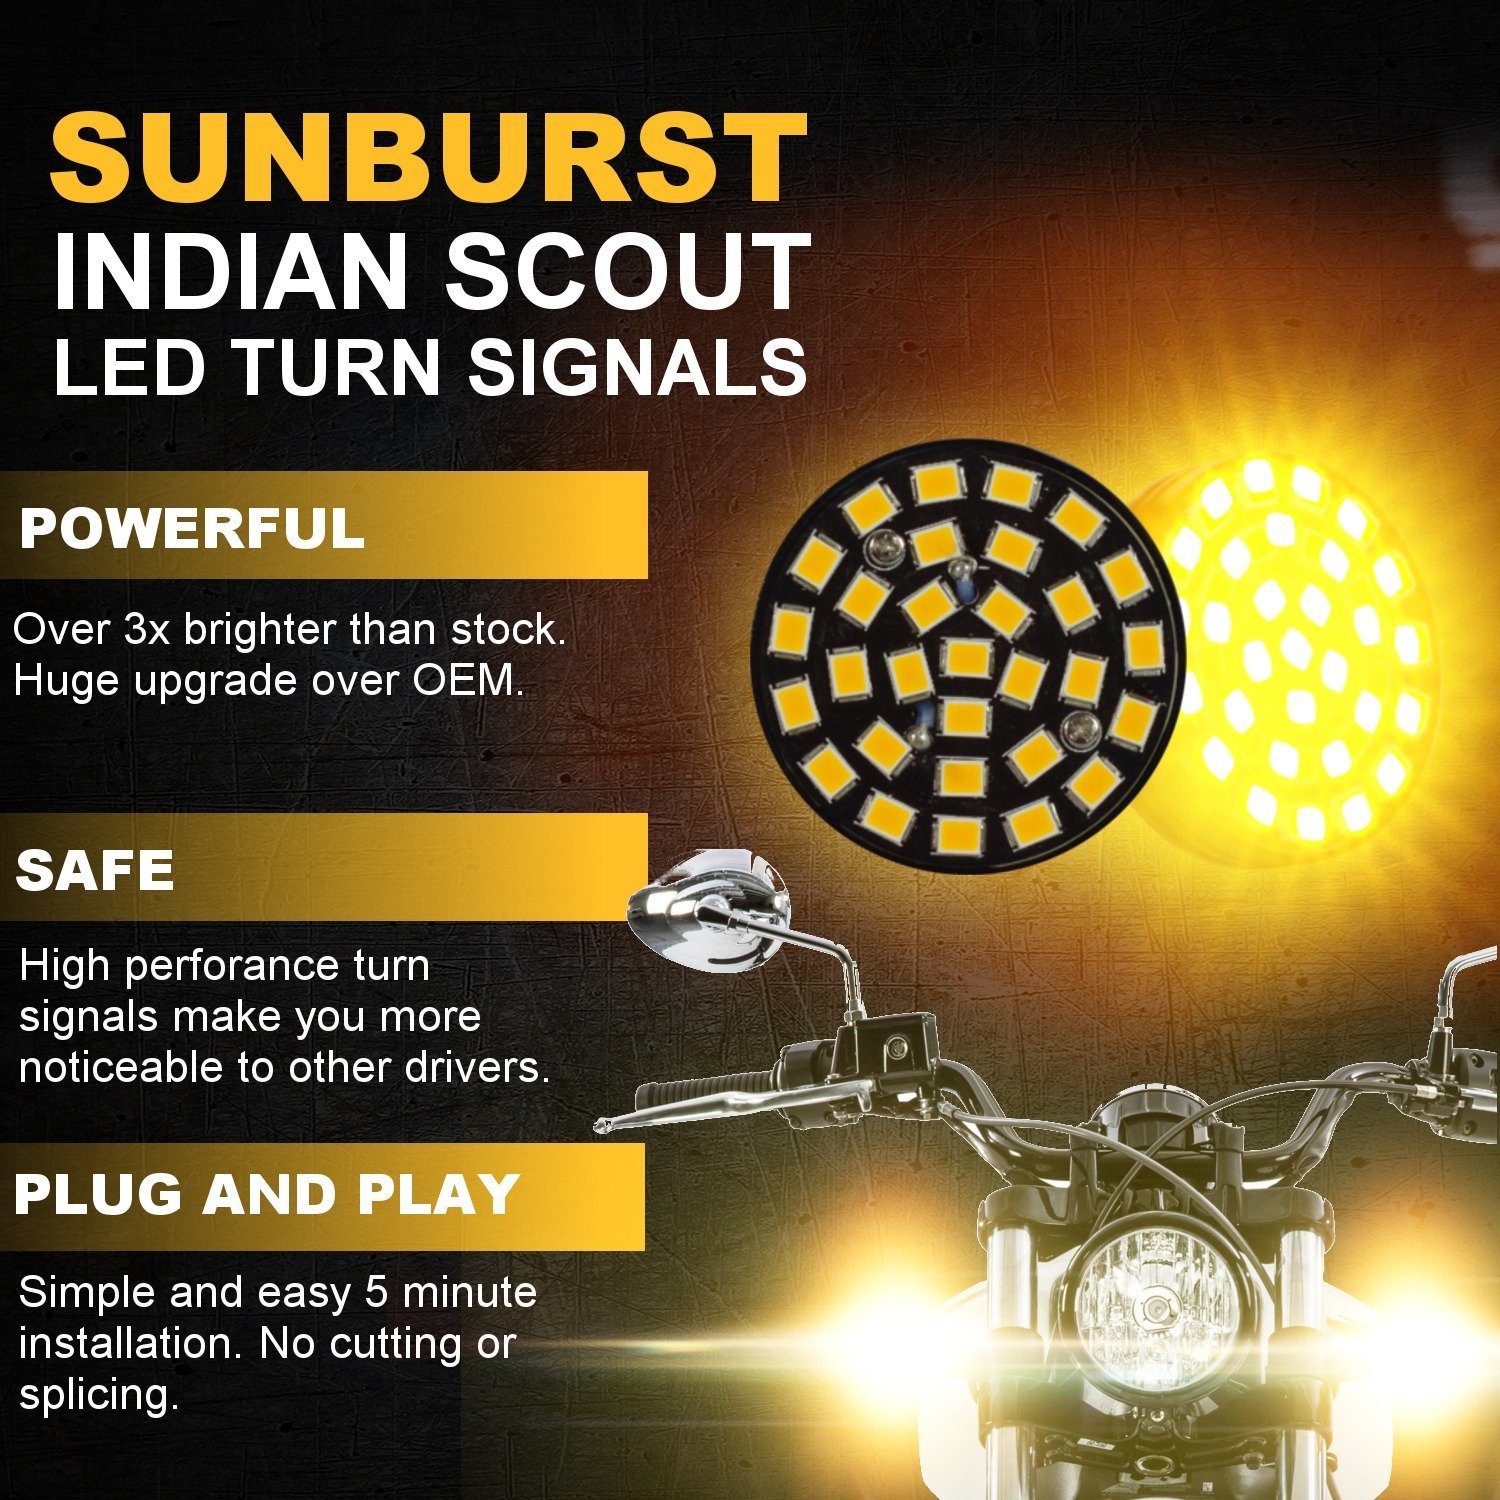 Specialty LED Turn Signals - Indian Scout SUNBURST LED Turn Signals